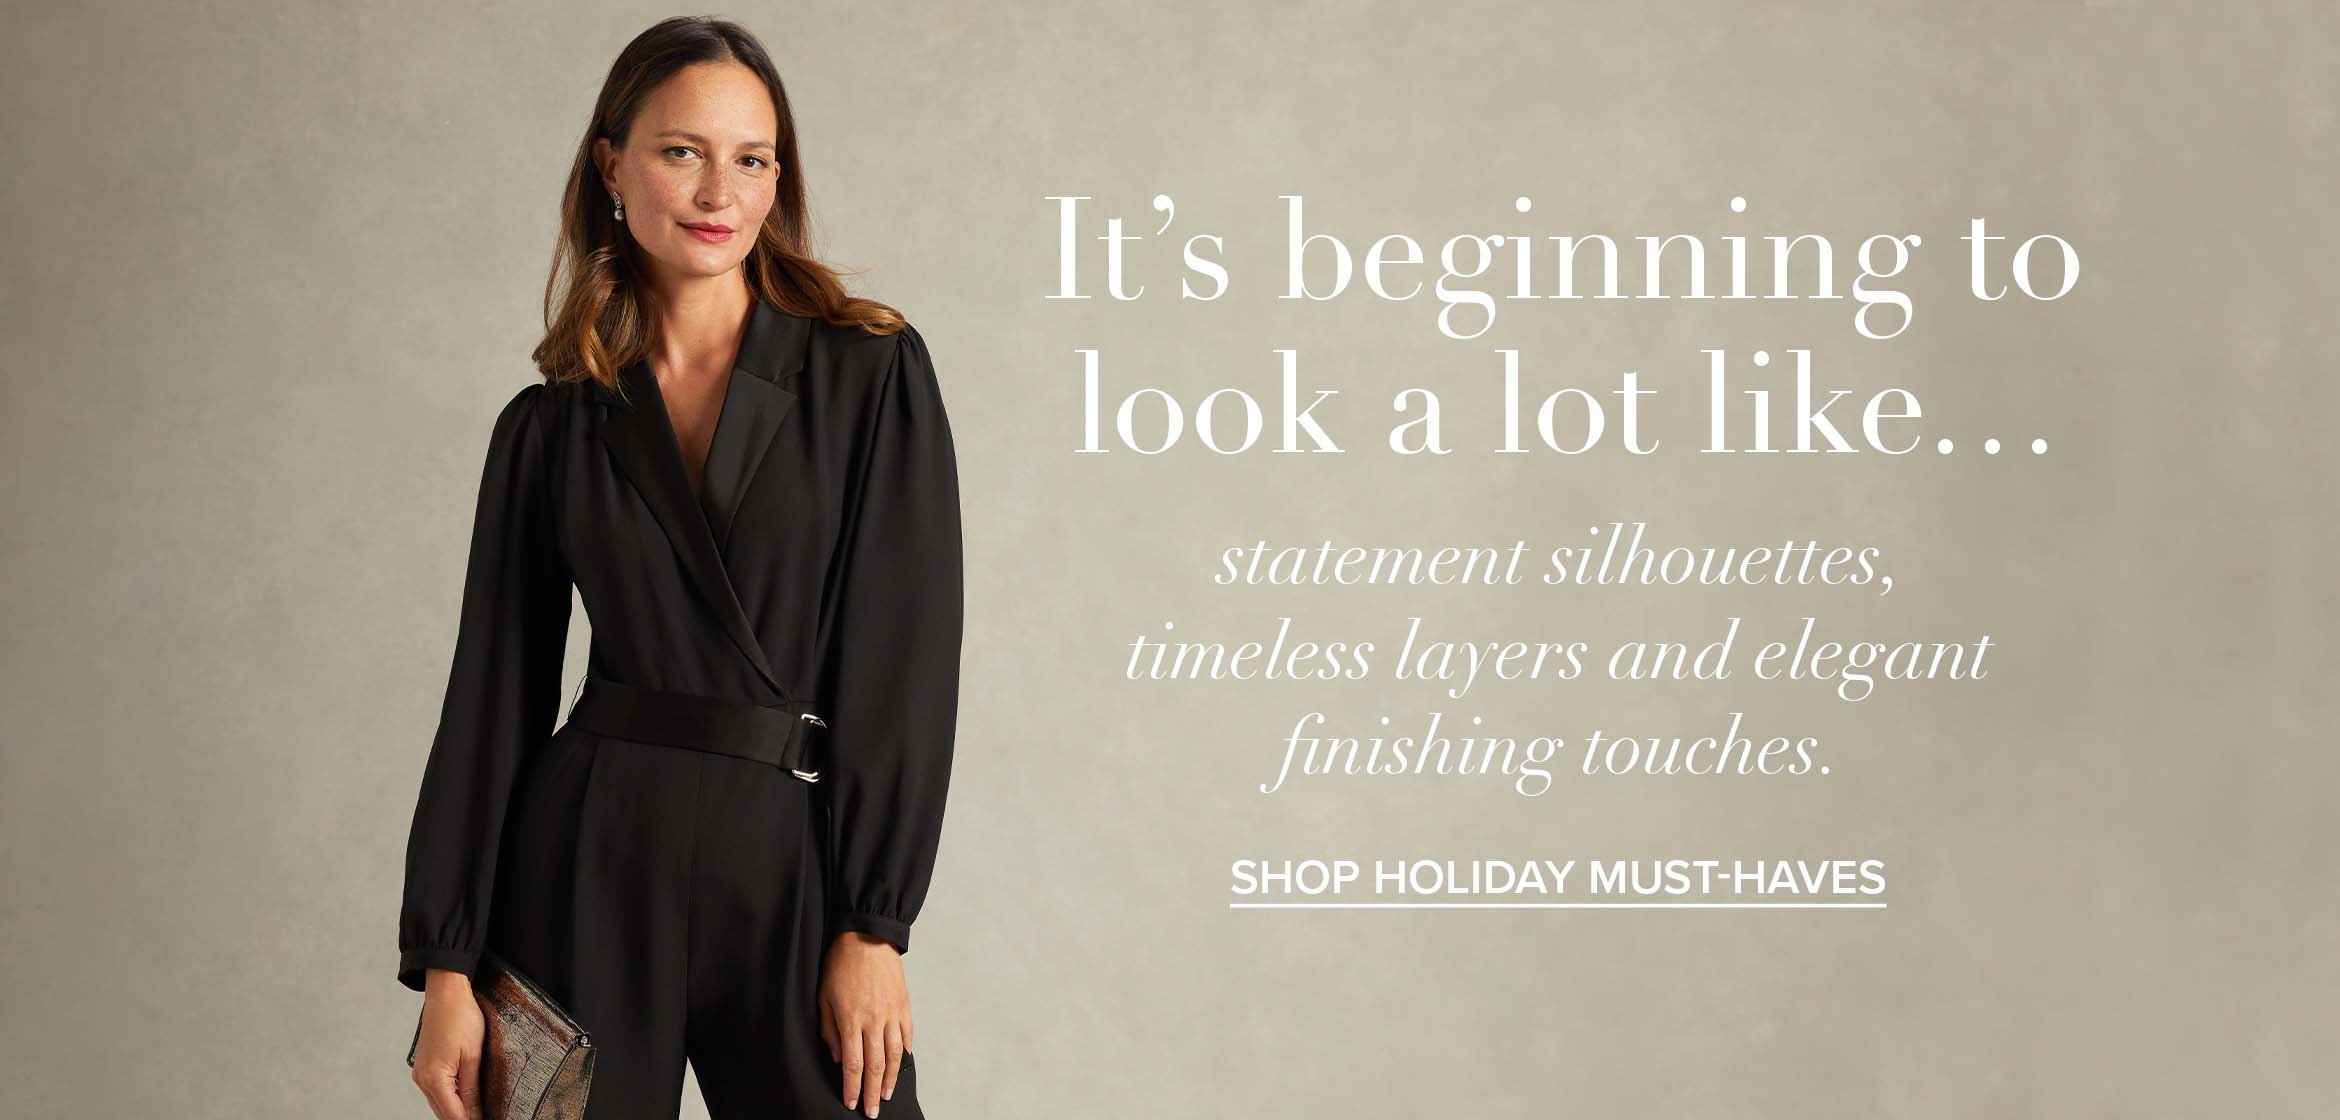 Shop Holiday Must-Haves